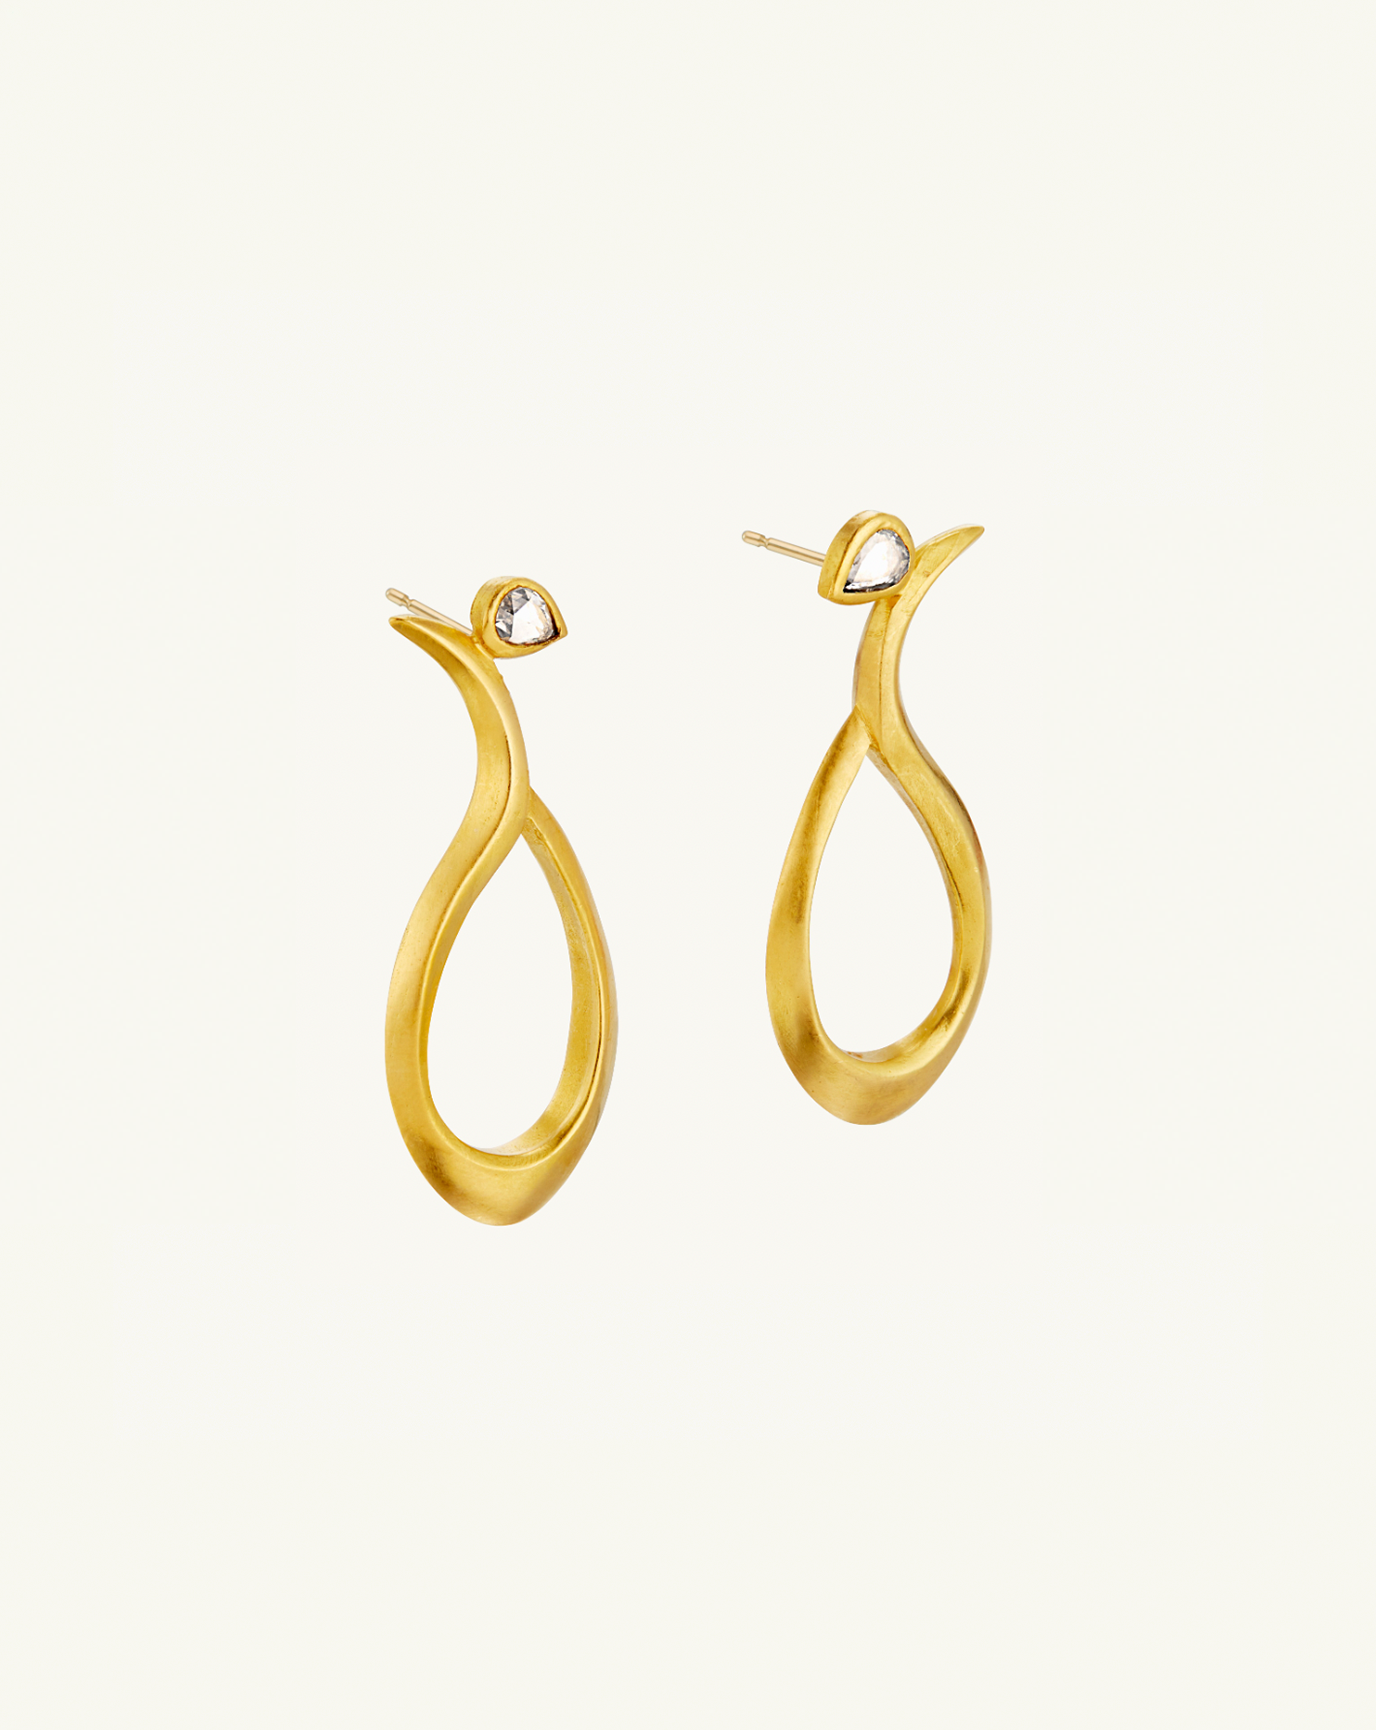 Product image of the sculptural gold earrings with small teardrop diamonds